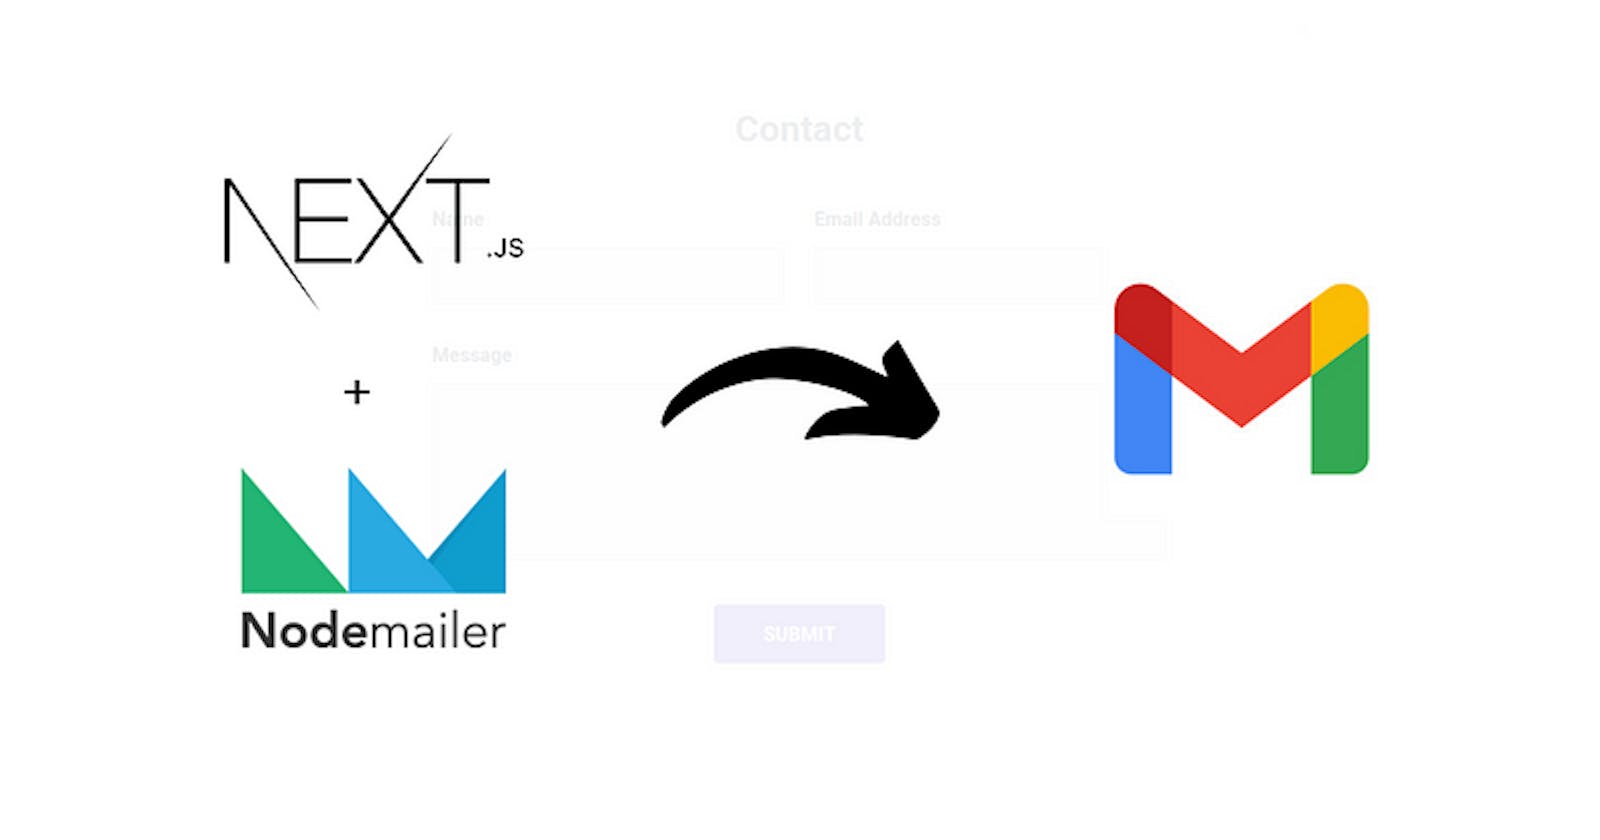 Email contact form using NextJS (App router)